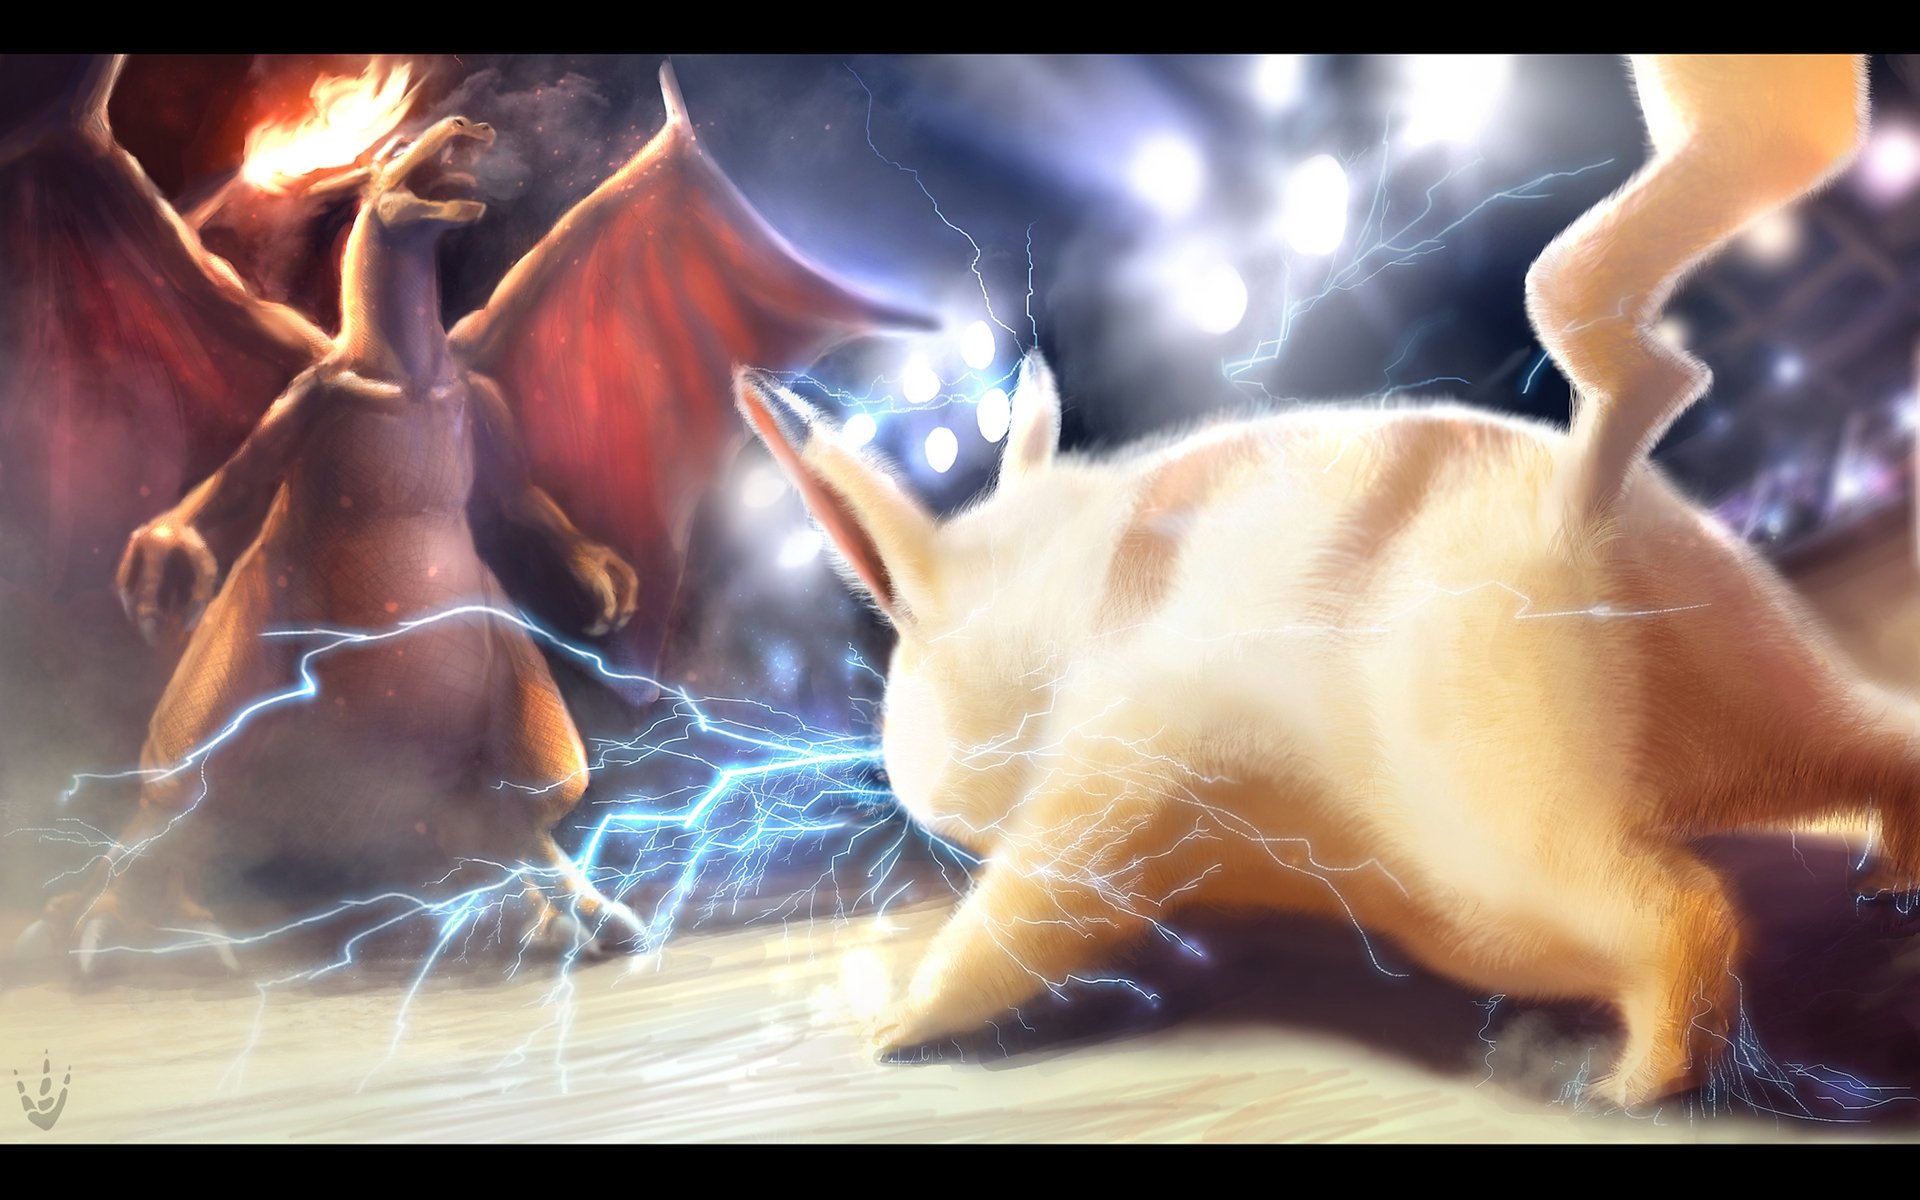 Pikachu vs Charizard Pikachu vs Charizard in a digital painting style